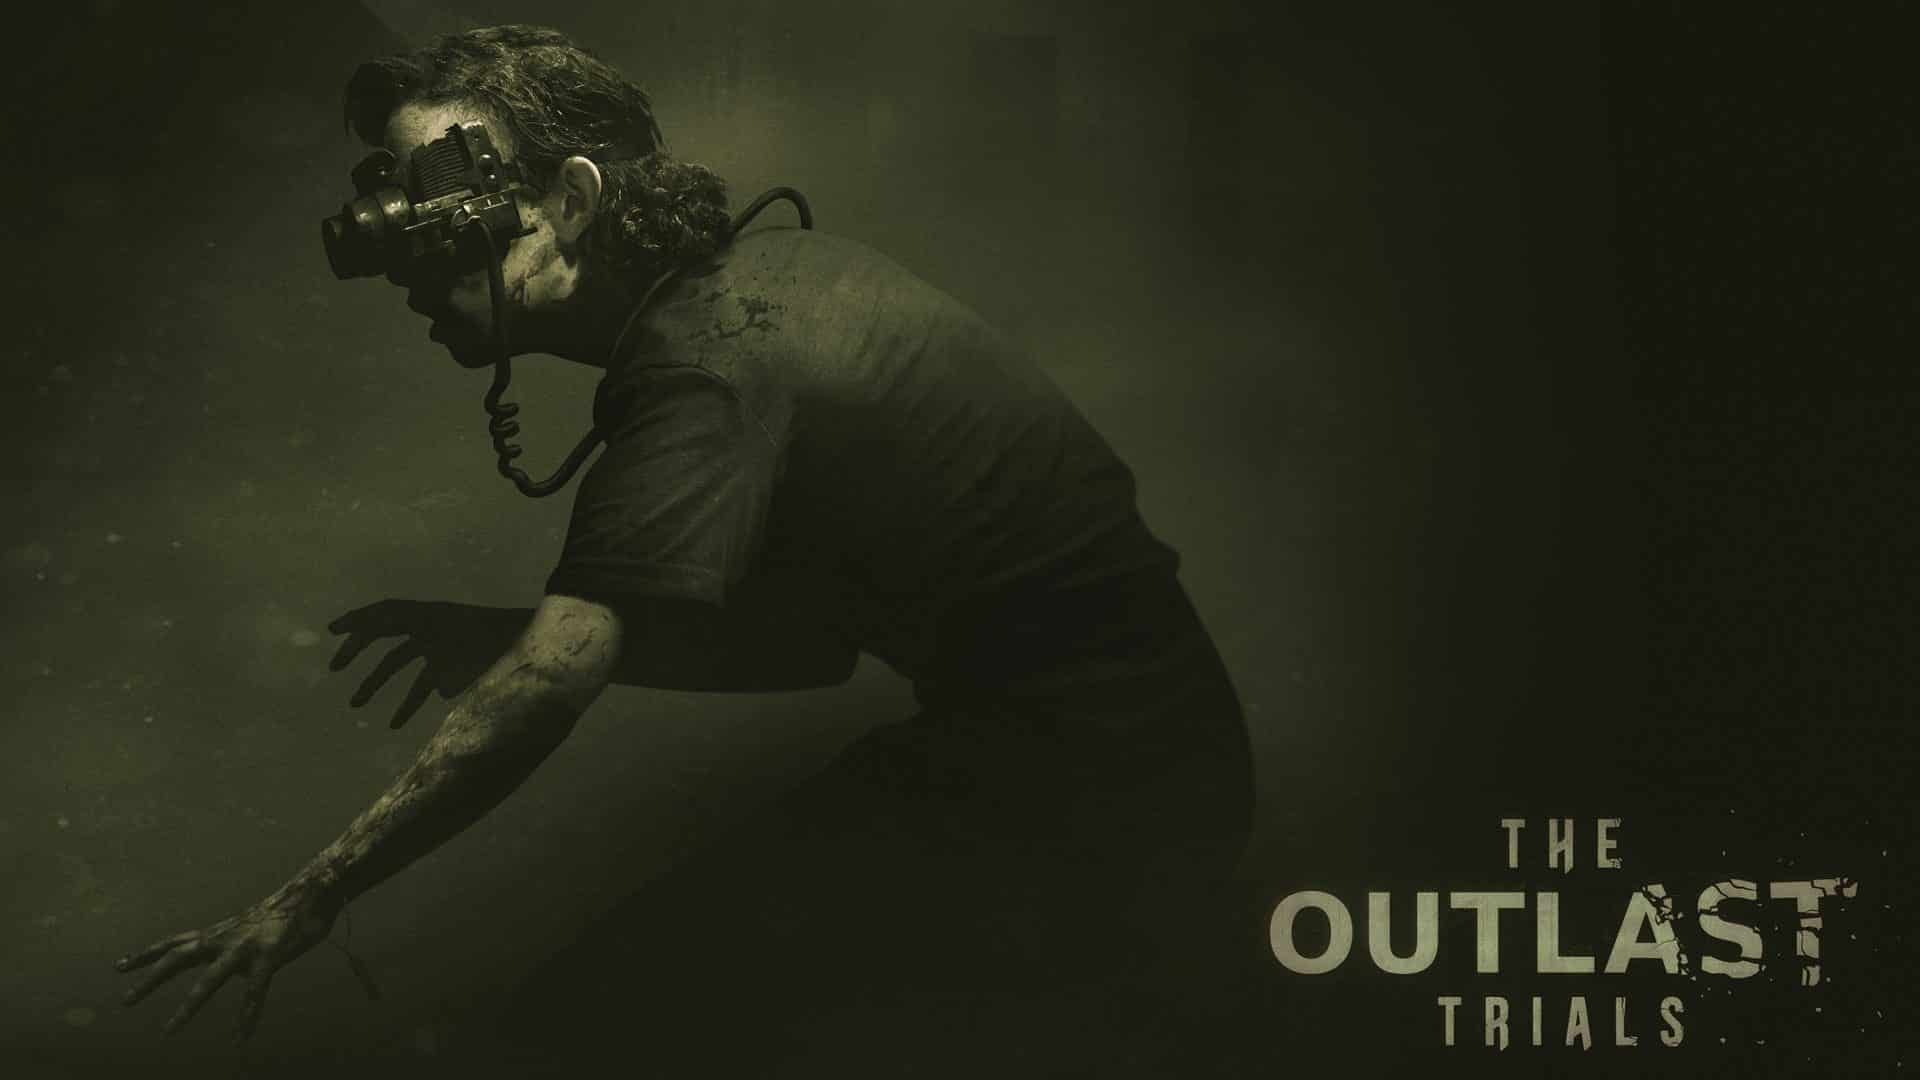 The Outlast Trials PC